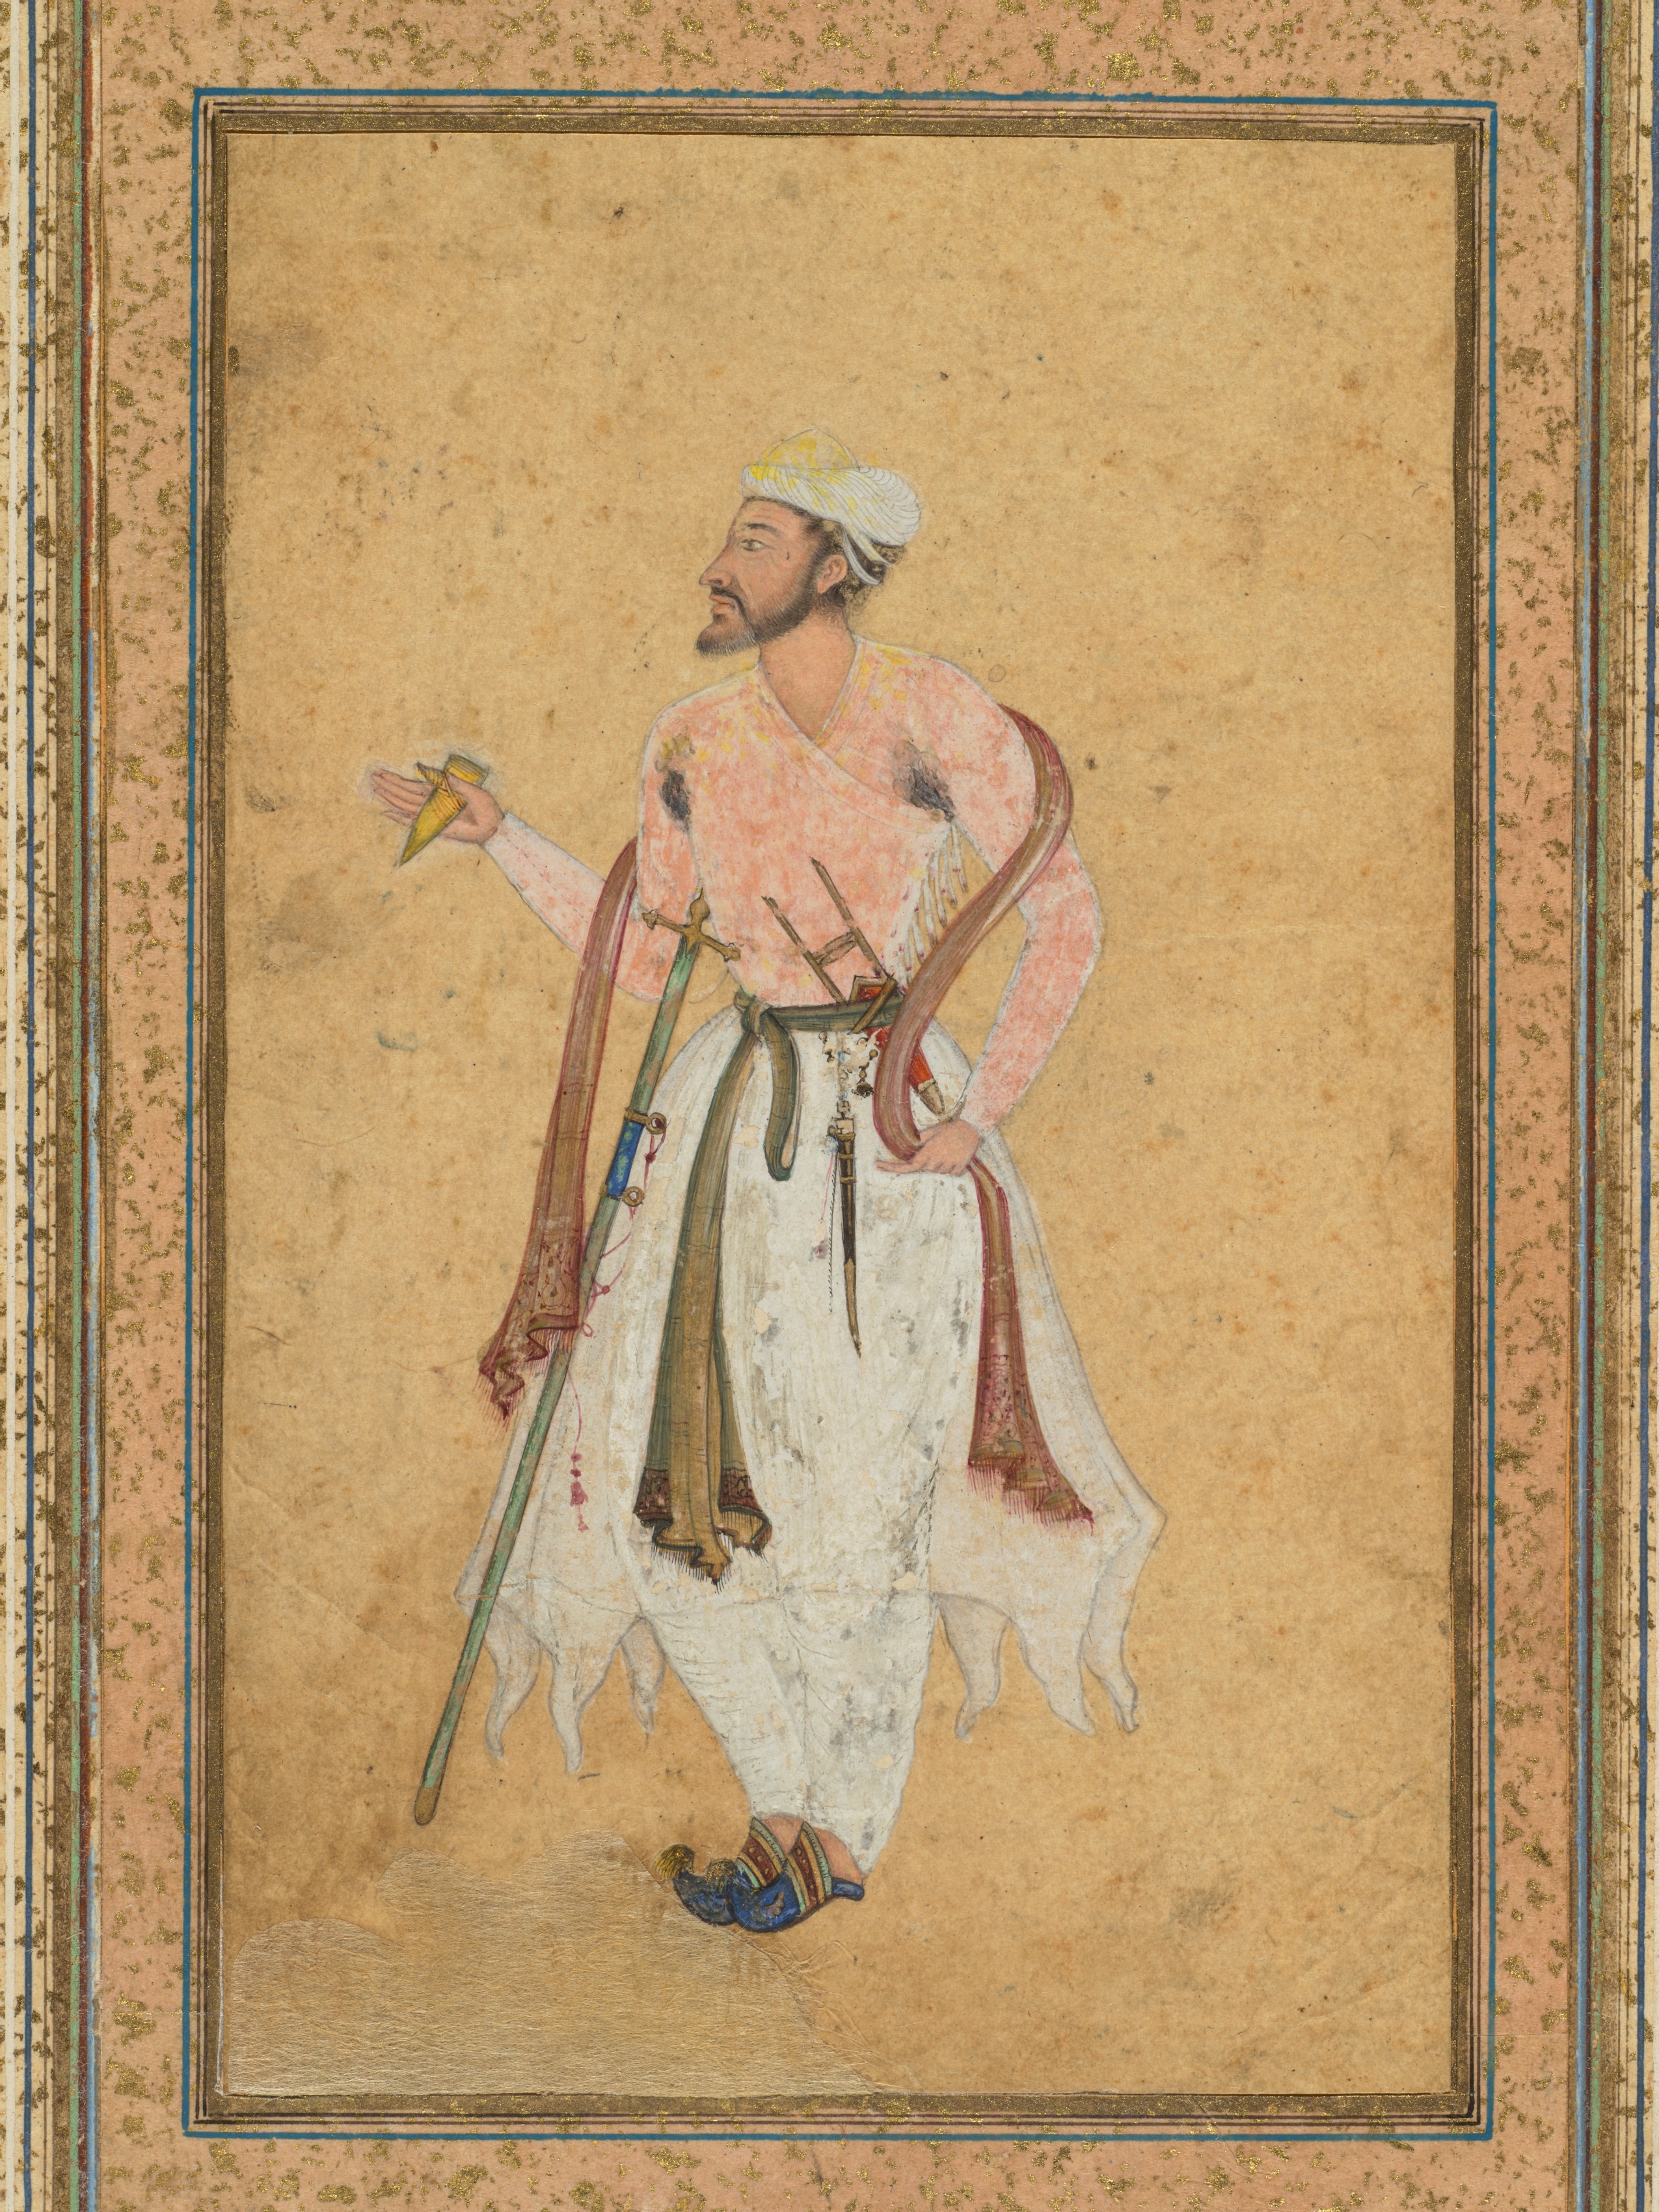 A Mughal courtier